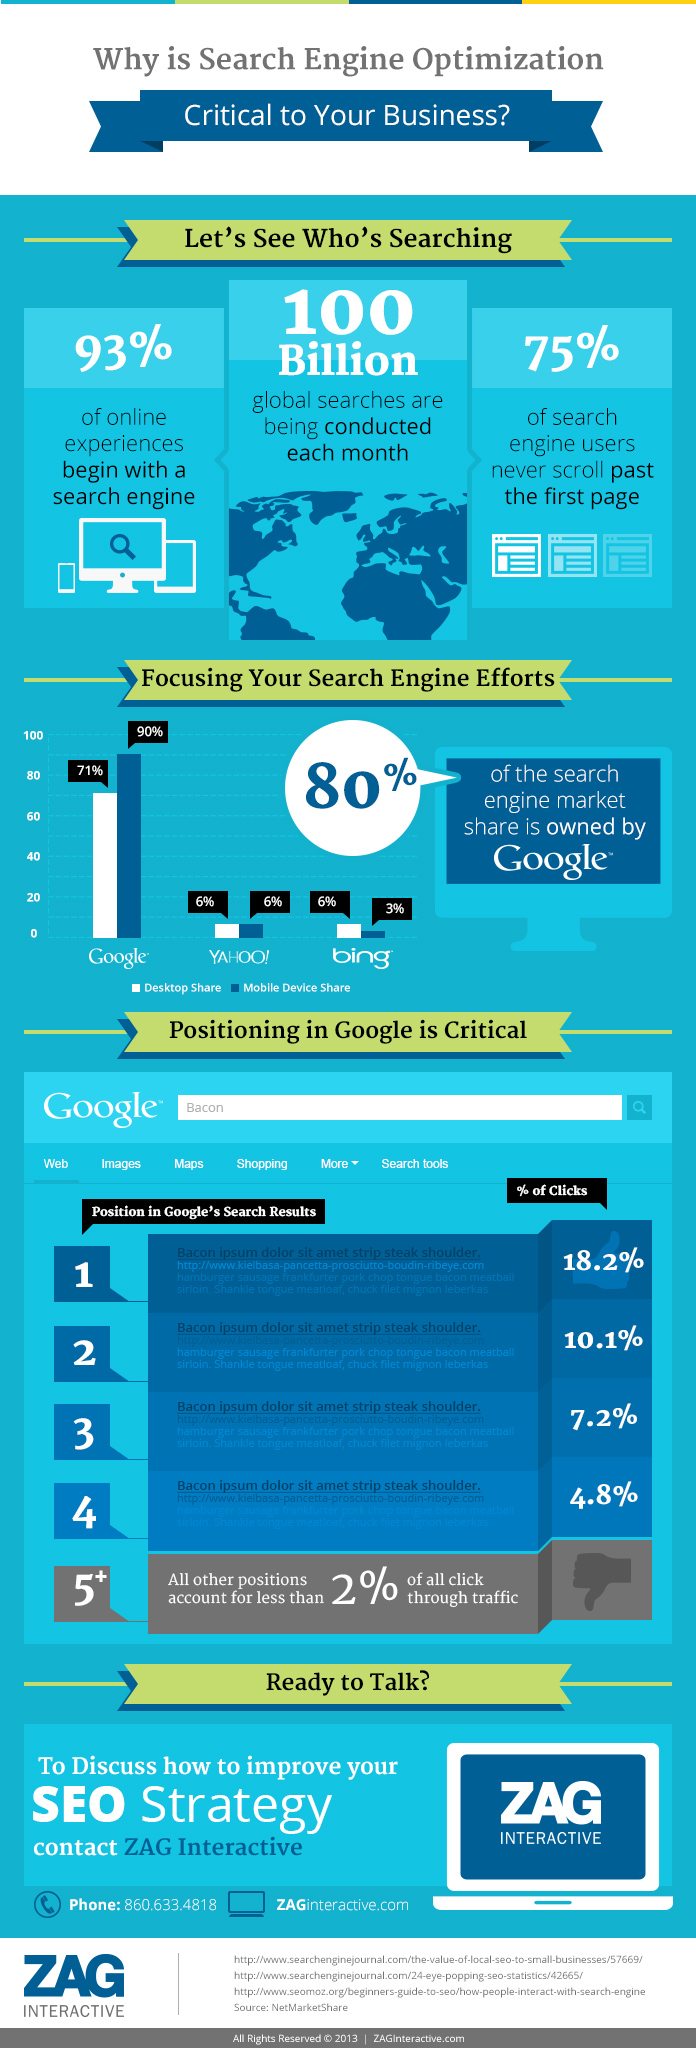 Why Search Engine Optimization is Critical